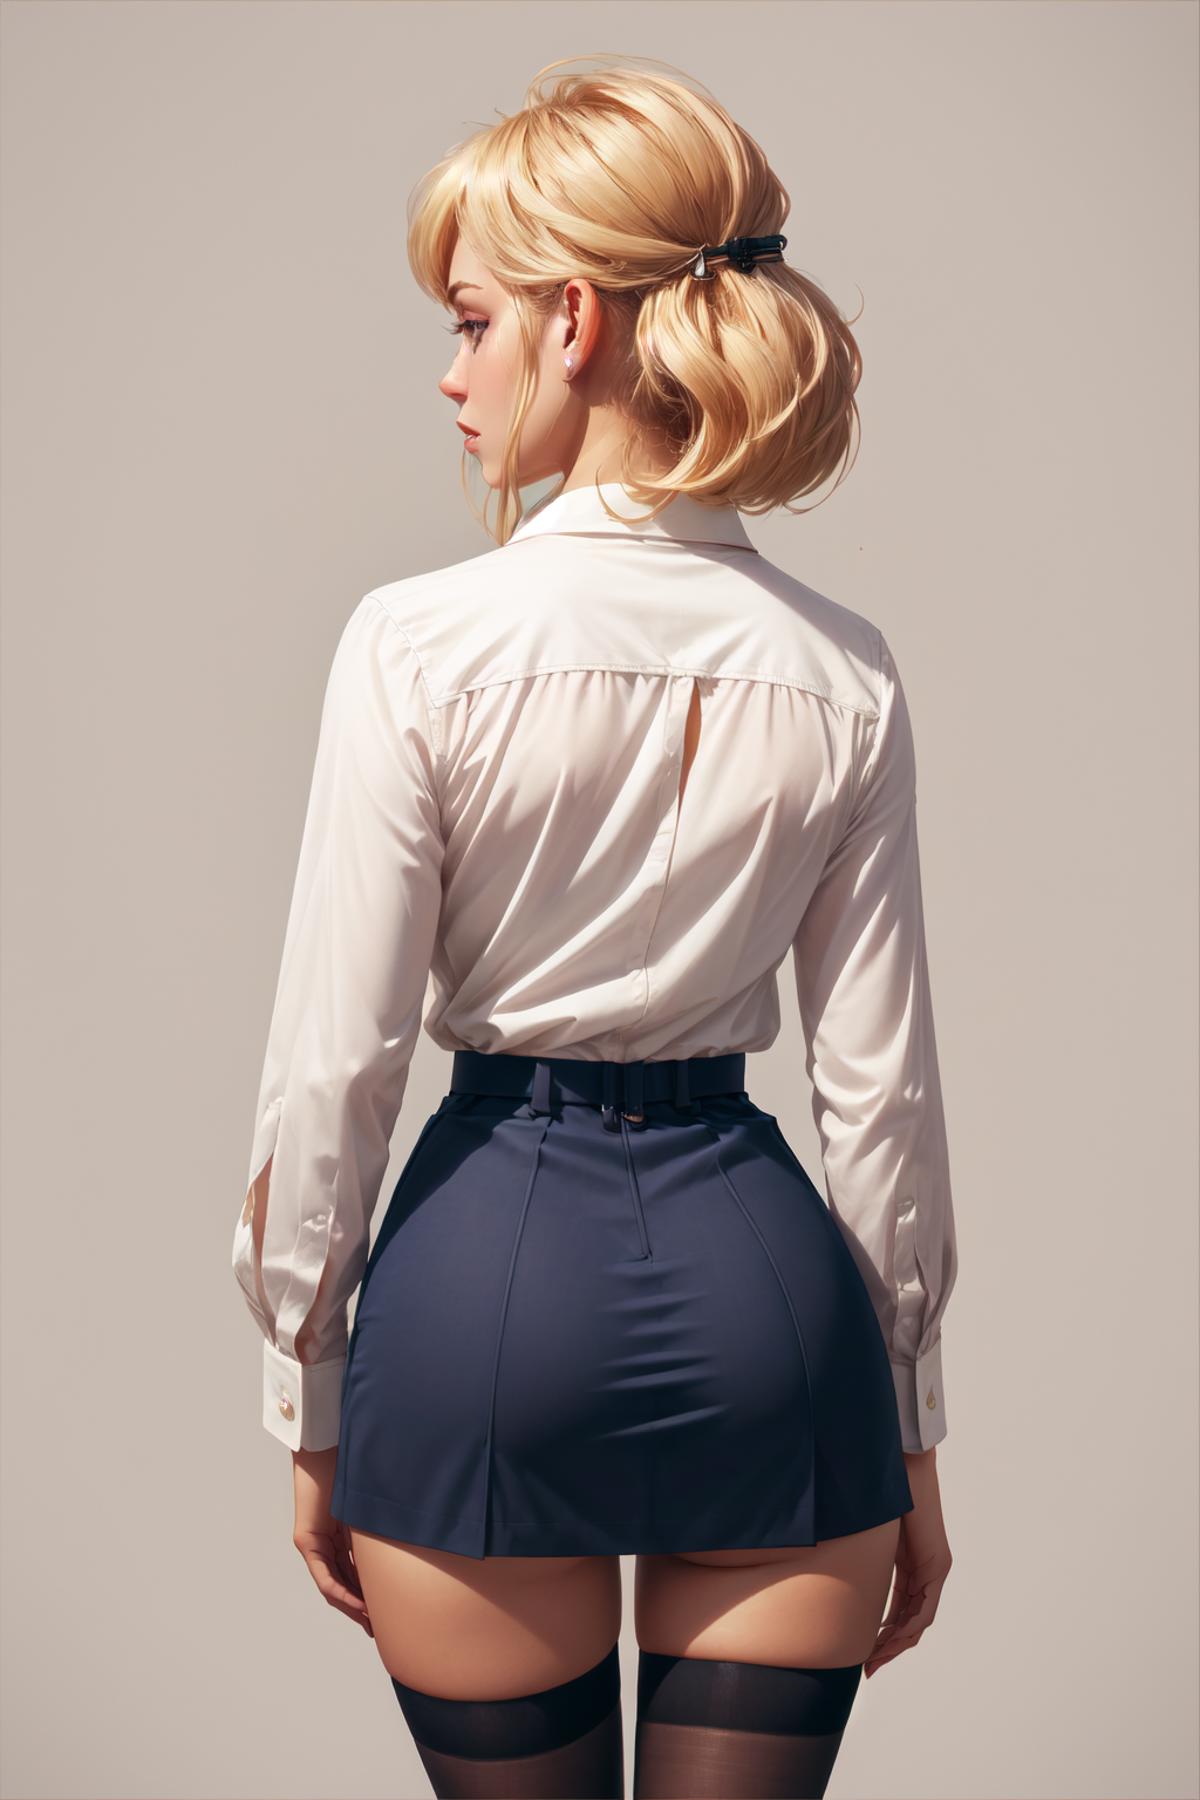 A woman wearing a white blouse and blue skirt is standing in front of a white background.